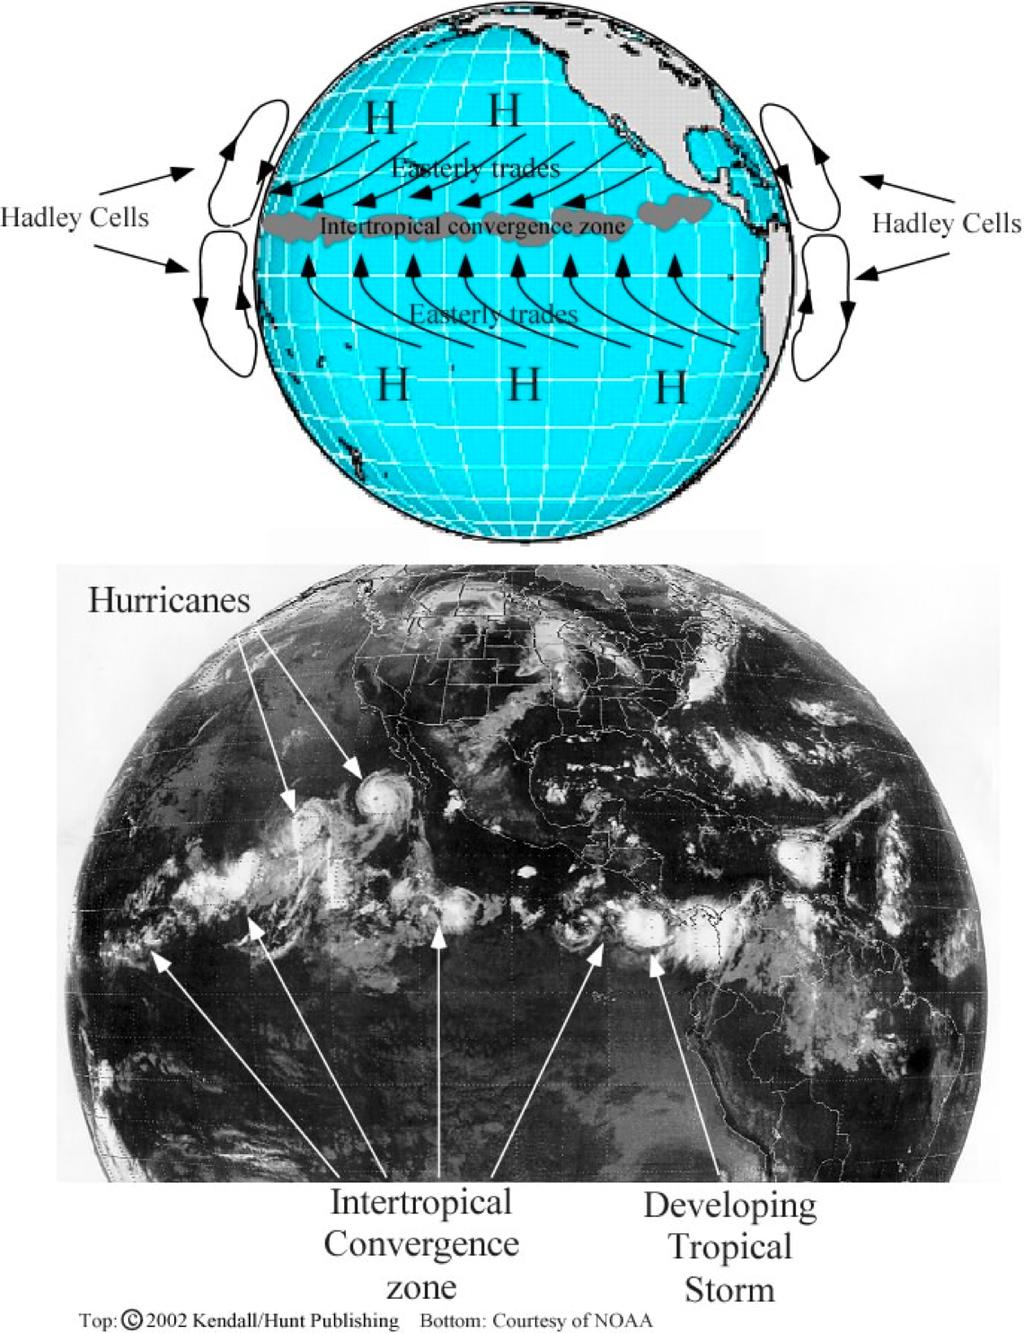 ITCZ Intertropical Convergence Zone The ITCZ is where the easterly trade winds from the Northern and Southern hemispheres meet. How does the position of the ITCZ change throughout the year?